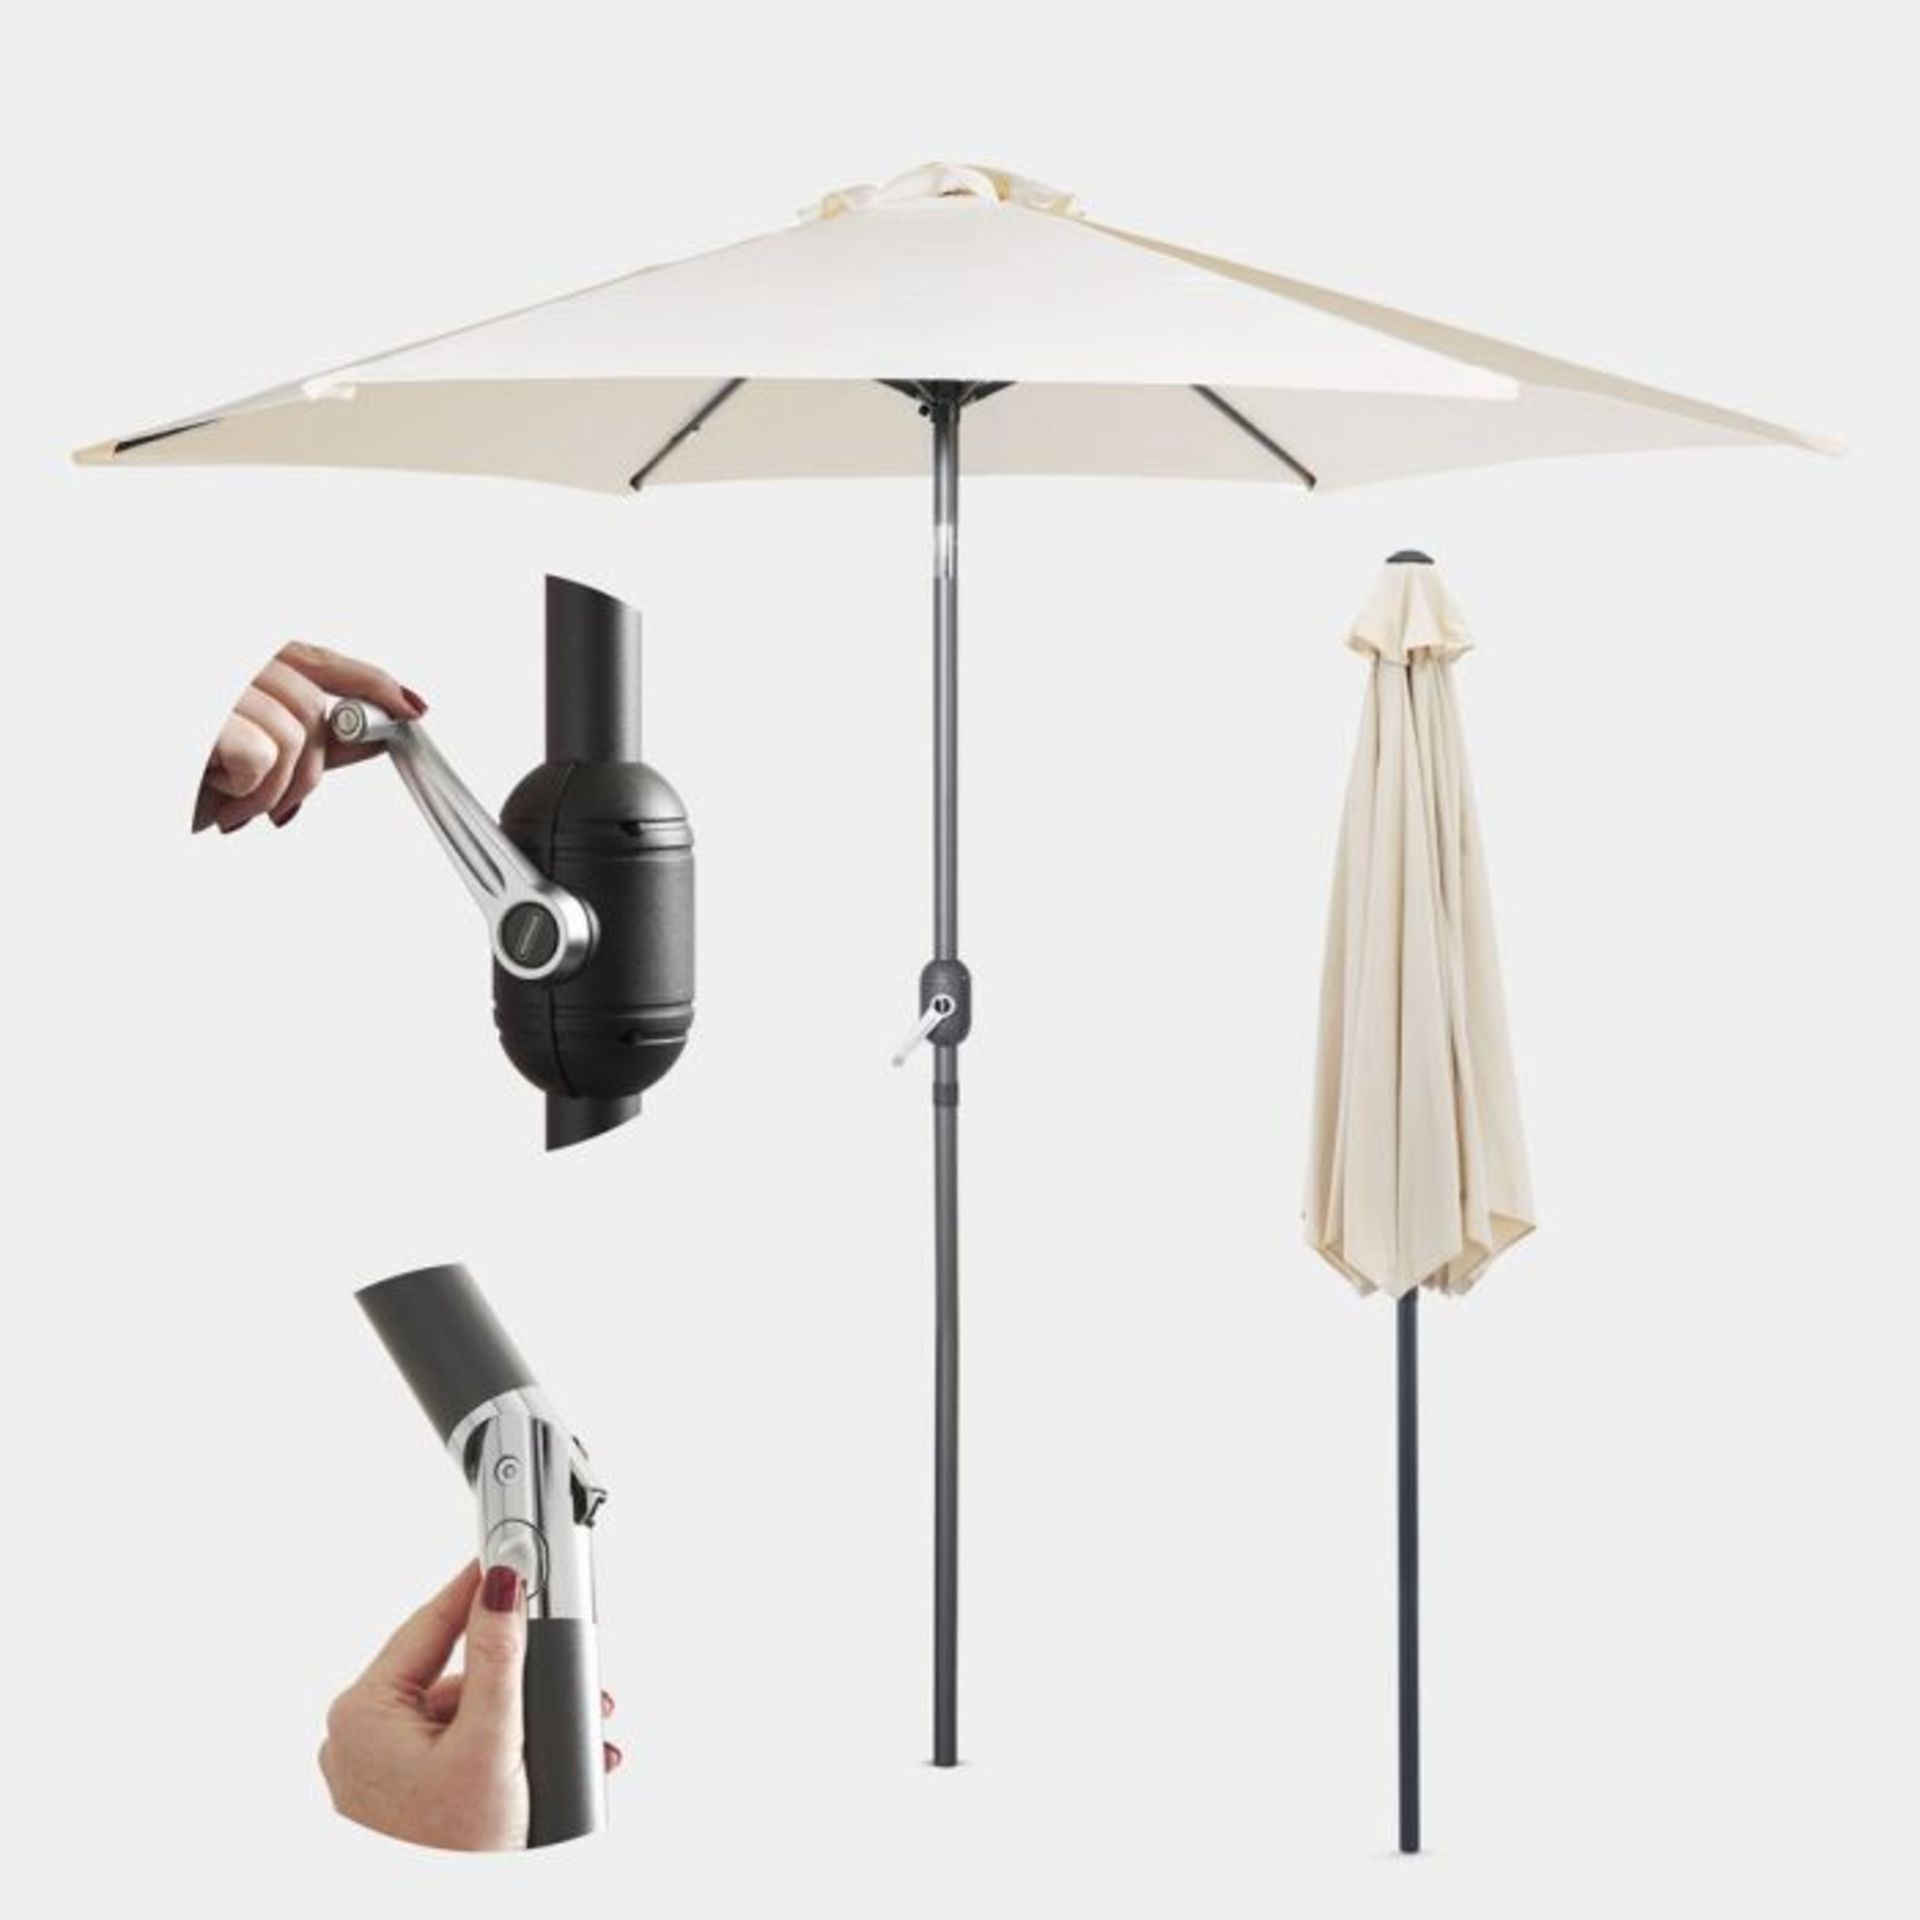 Ivory Cream 2.7m Steel Garden Parasol. - ER36. As much as everyone loves a bit of sunshine, we are